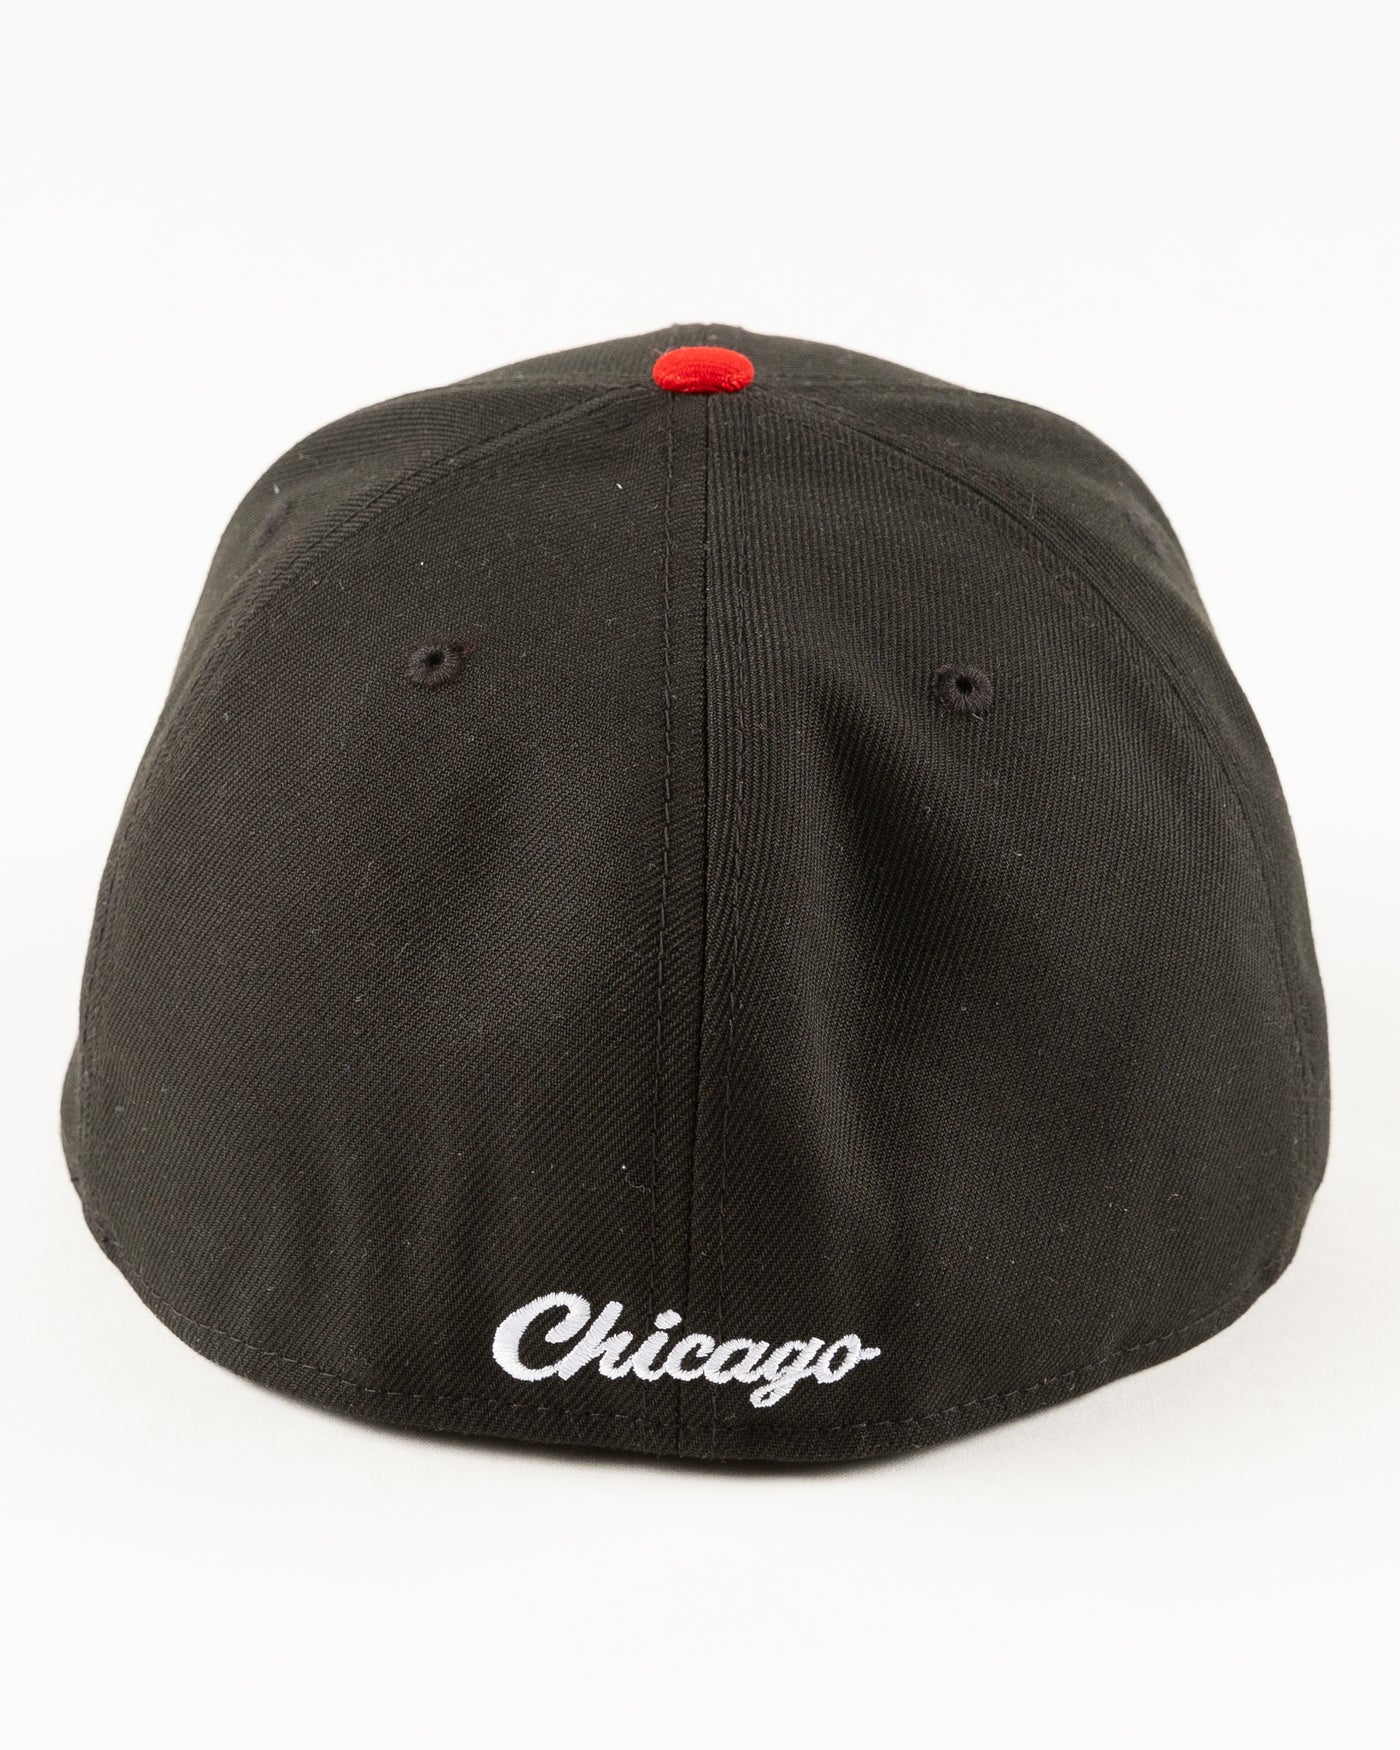 black and blue New Era fitted cap with tonal Chicago Blackhawks primary logo on front - back lay flat